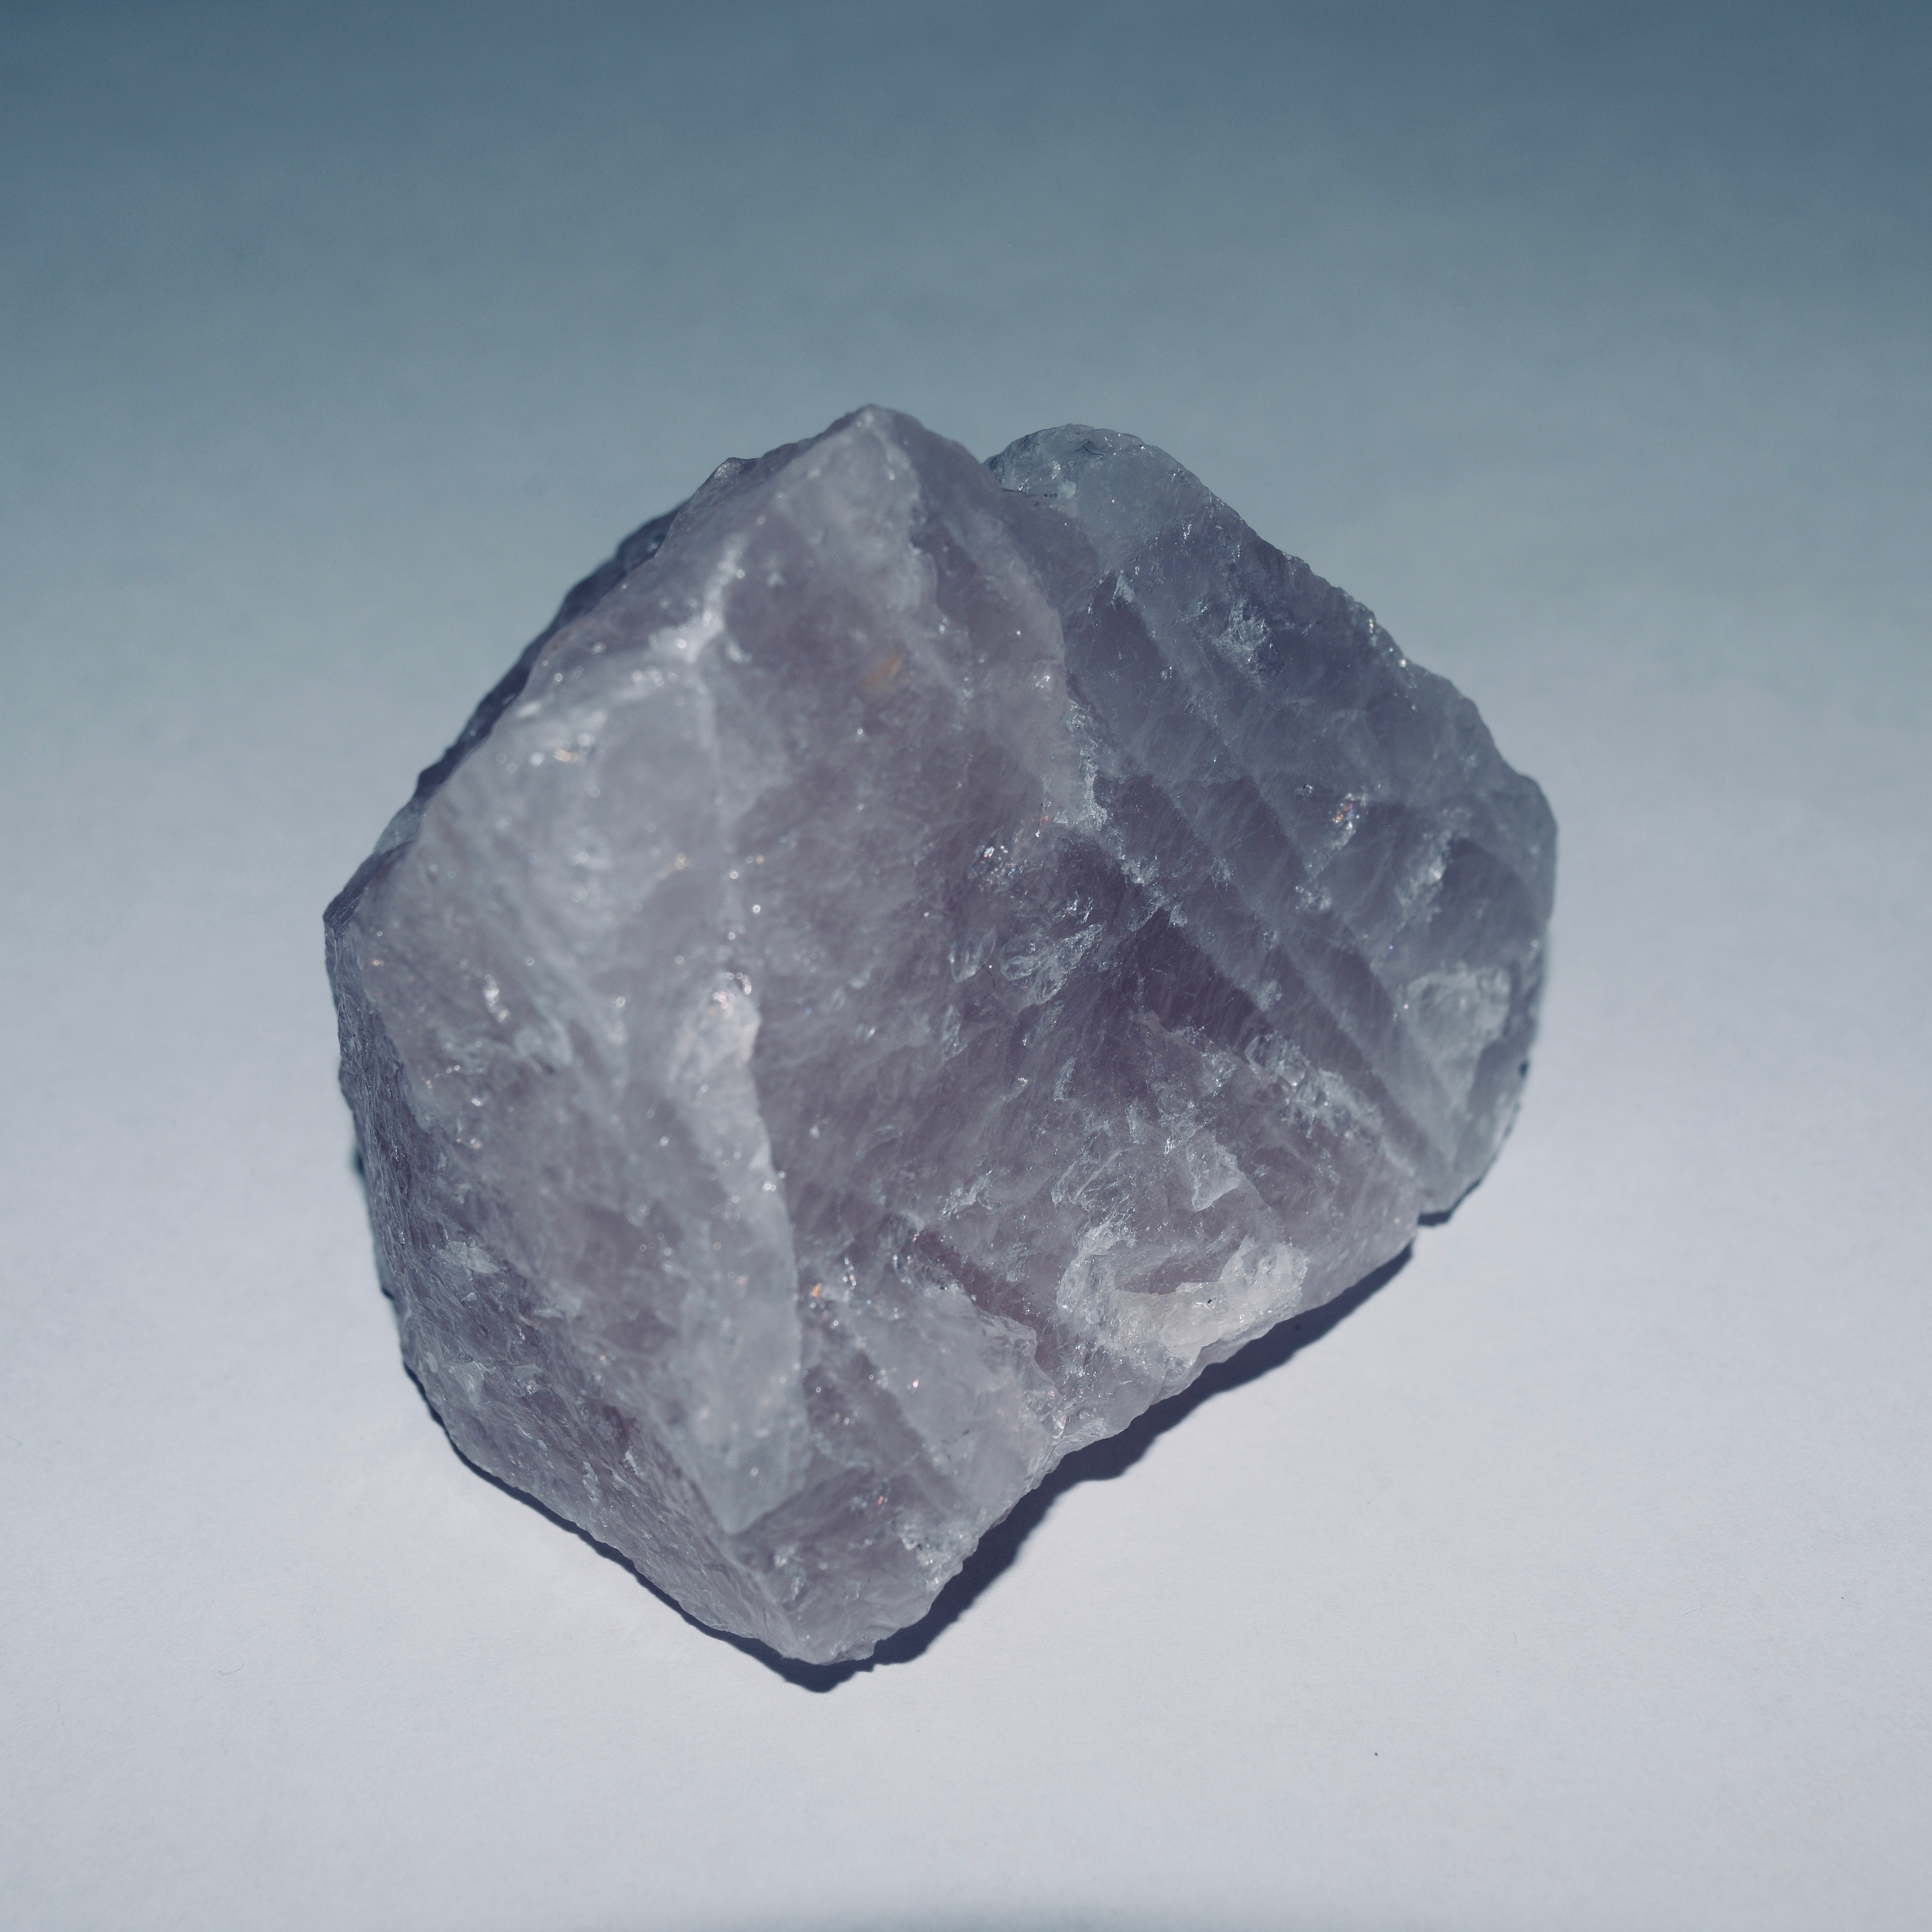 Image of crystal